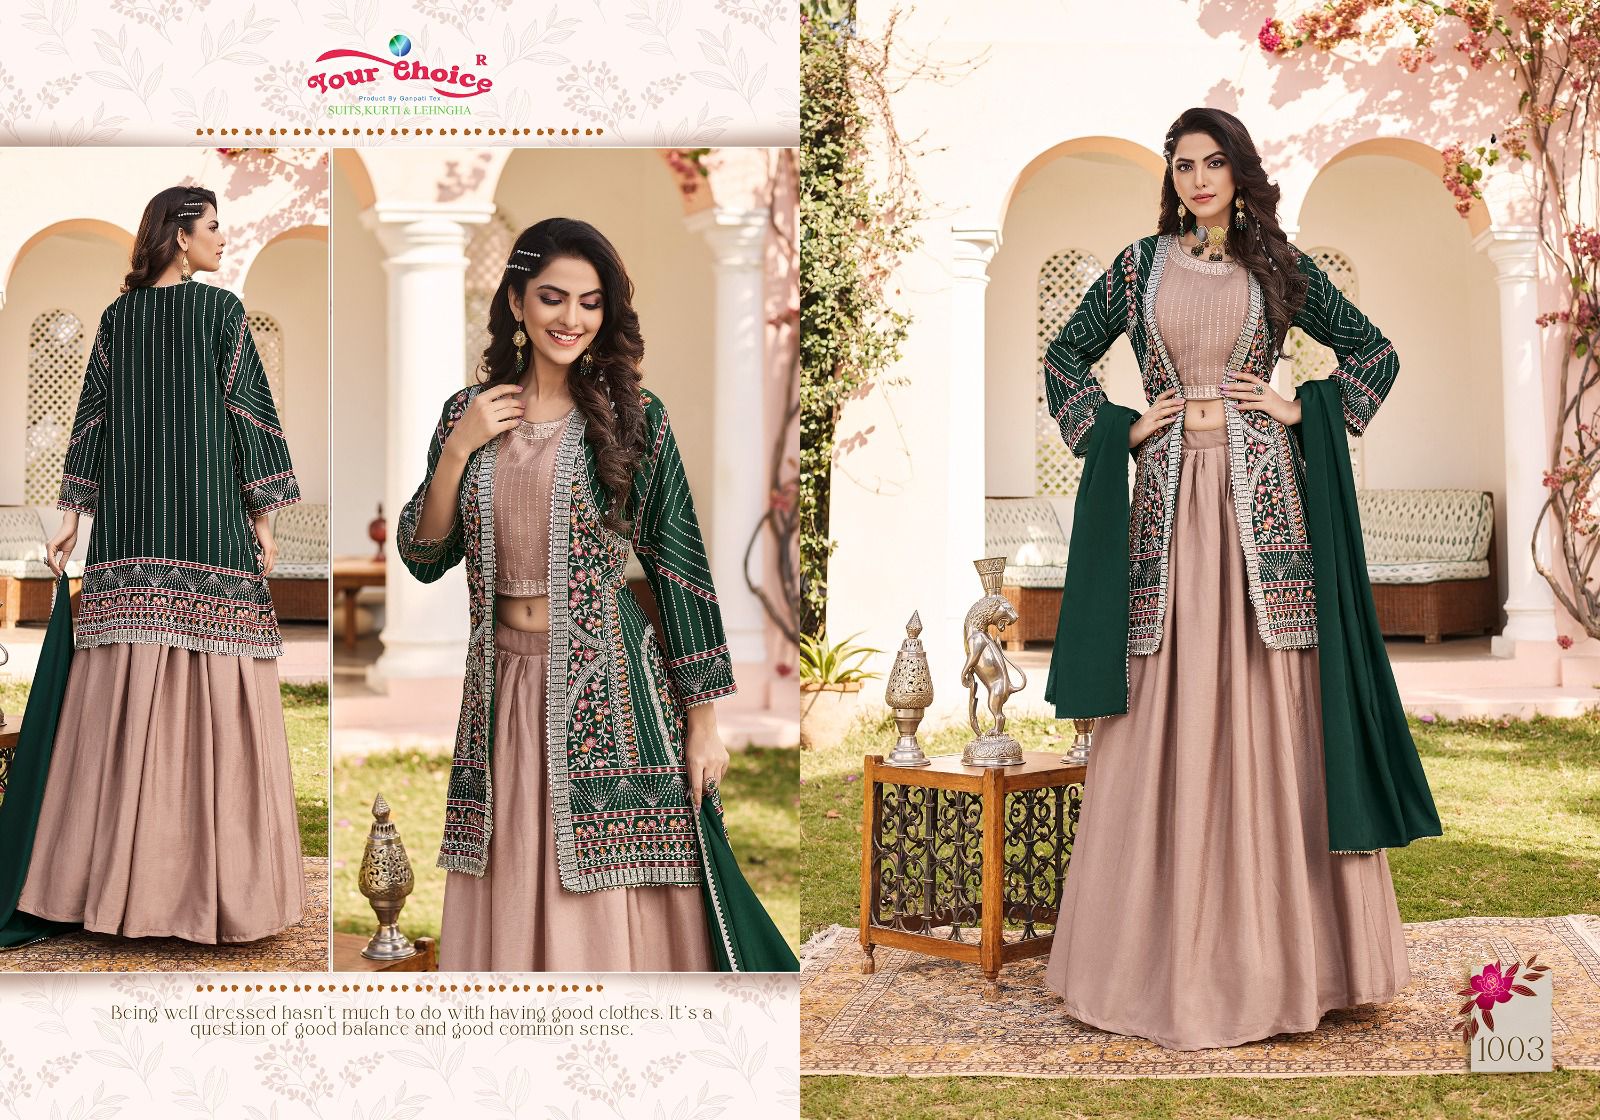 Your Choice Shahzadi collection 2